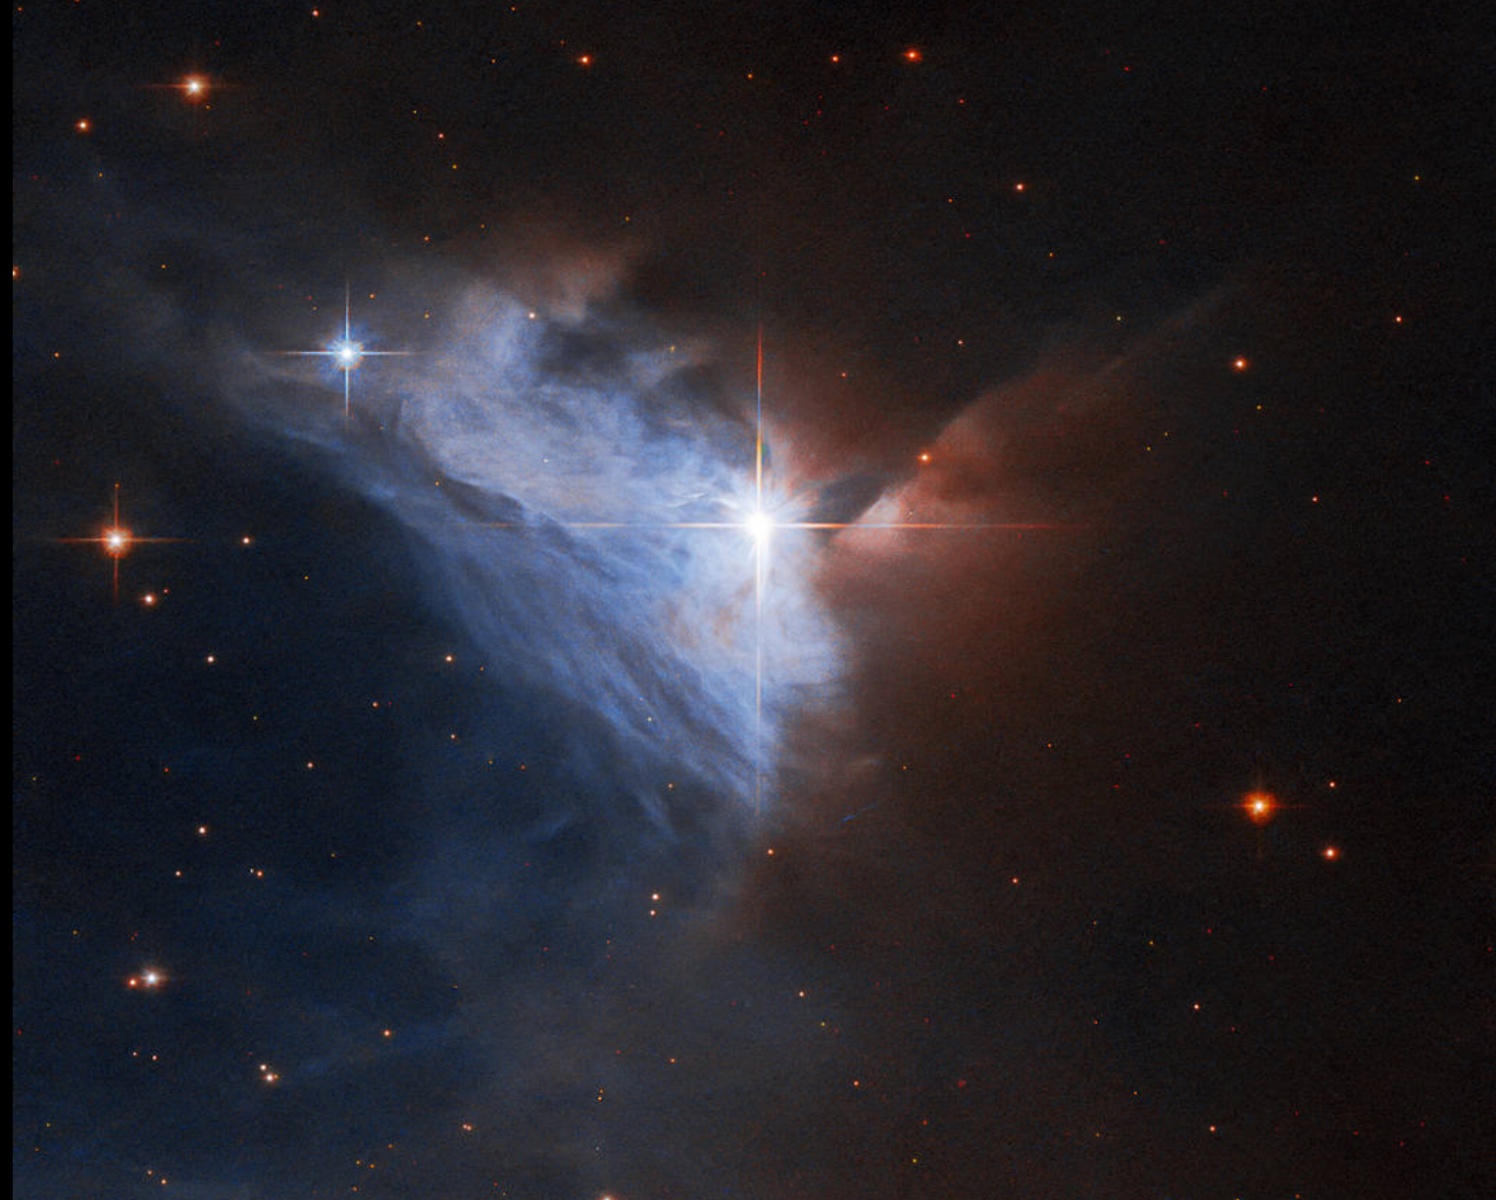 NASA's Hubble Space Telescope Captures Cosmic Cloud from Emission